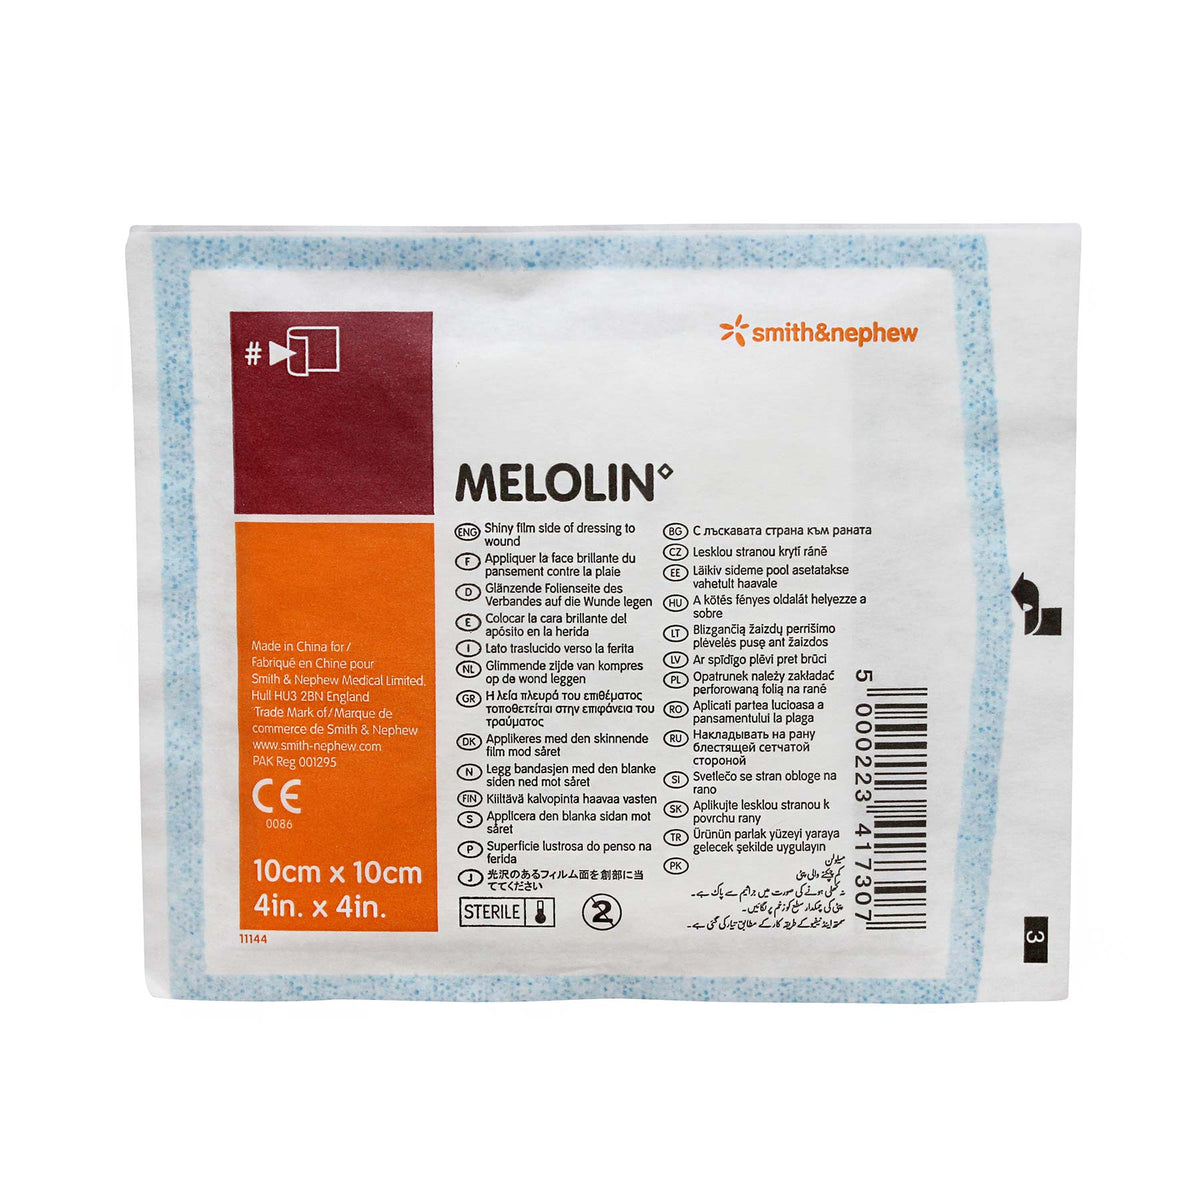 Melolin Low Adherent Dressing - 10cm x 10cm, Box of 10